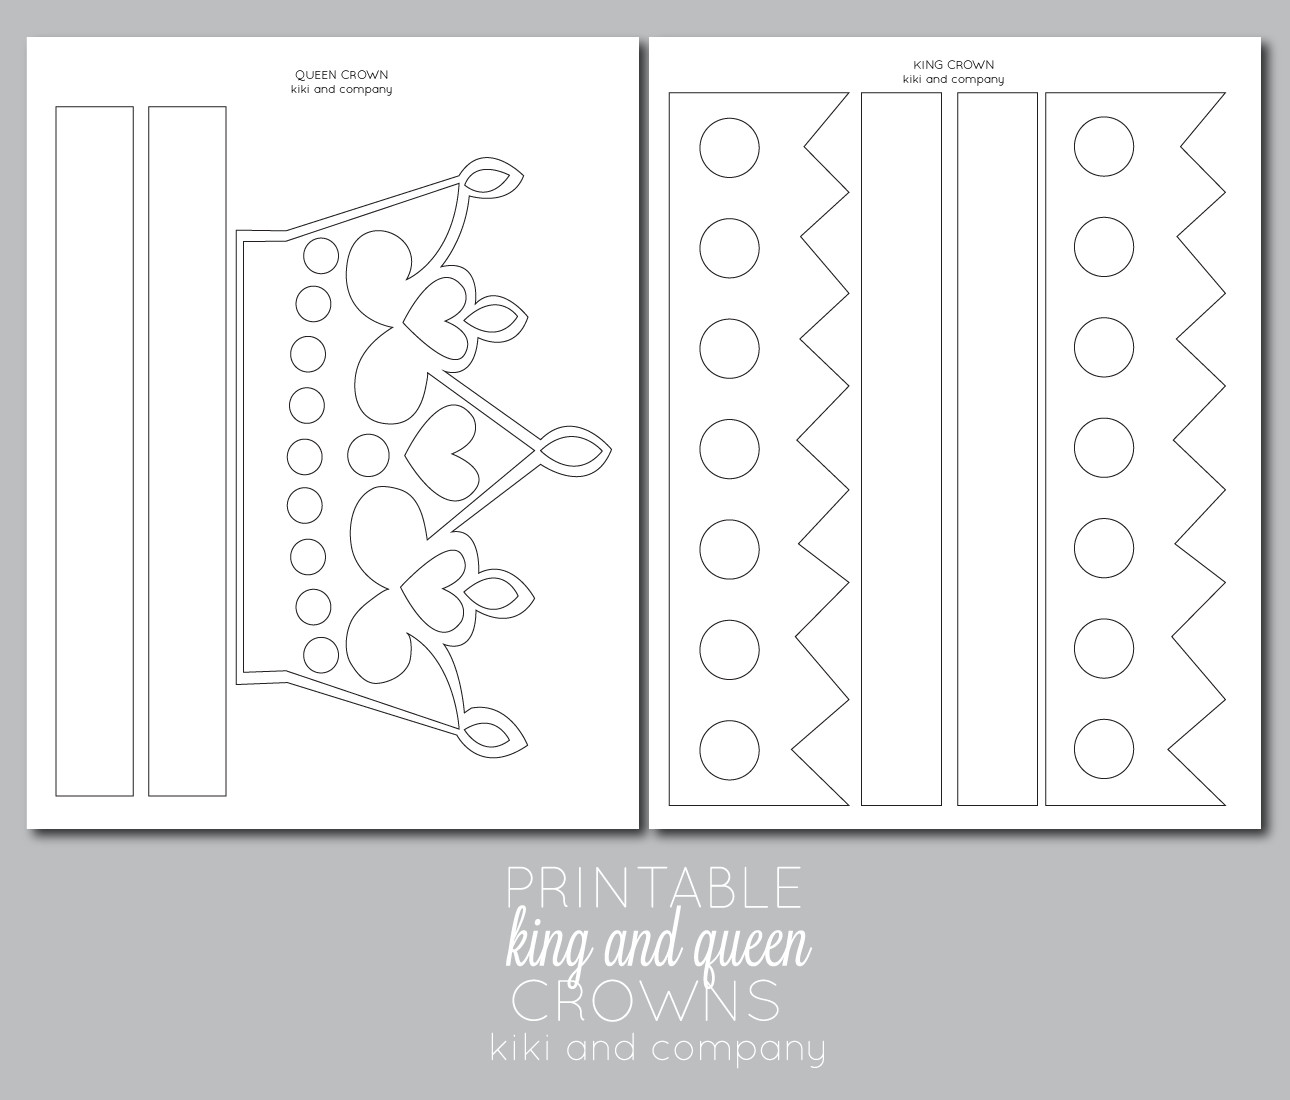 Printable Kings and Queens crown Free Printable The